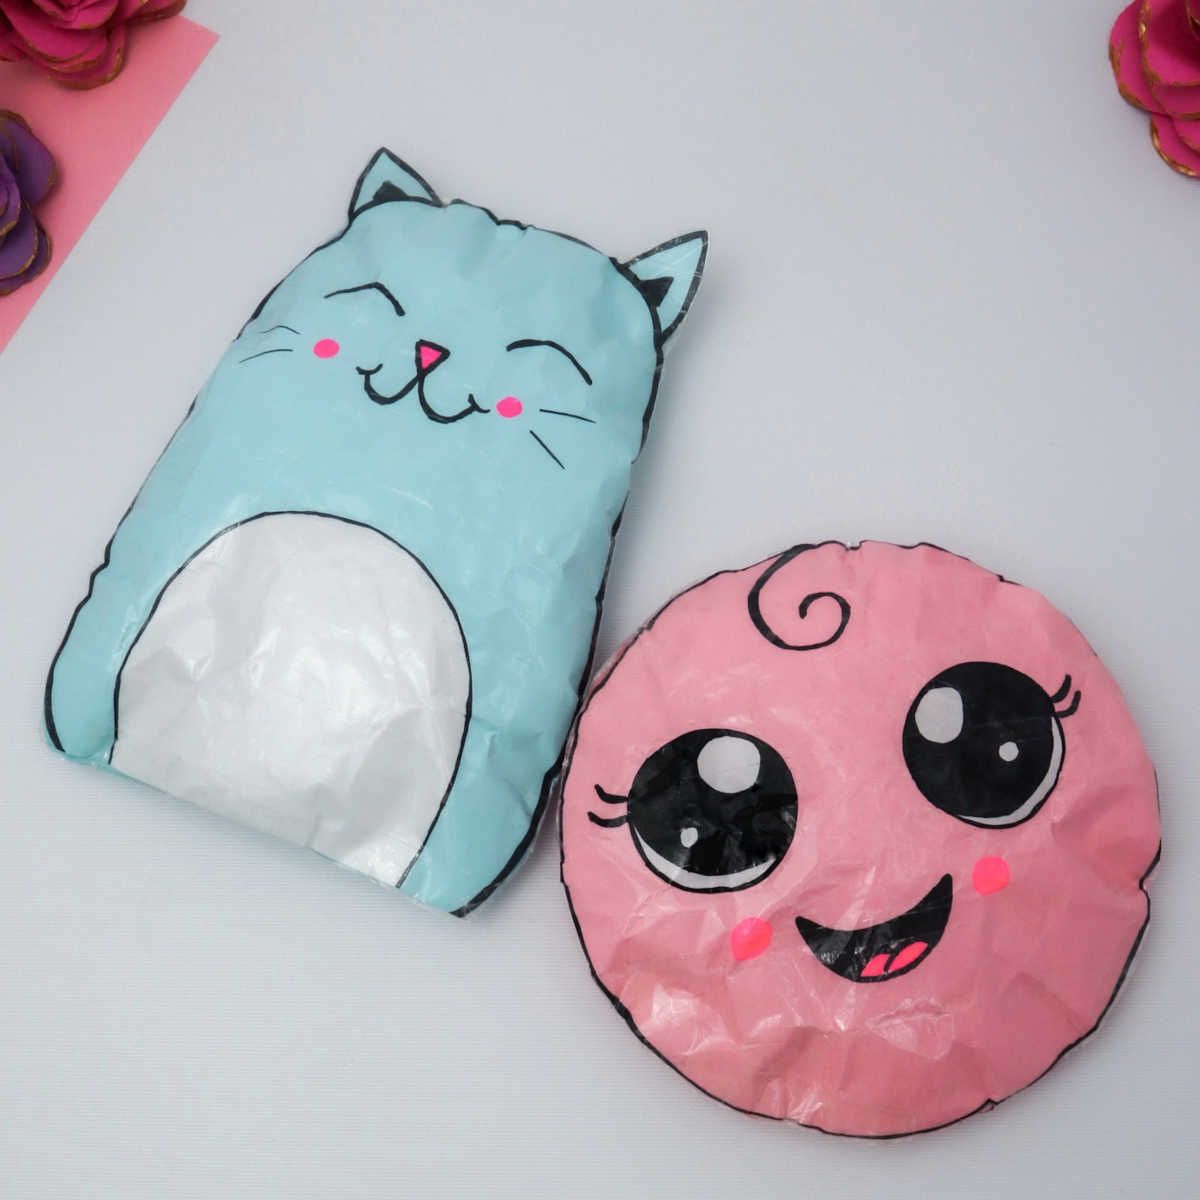 How to Make Paper Squishies Tutorial) - Craftsy